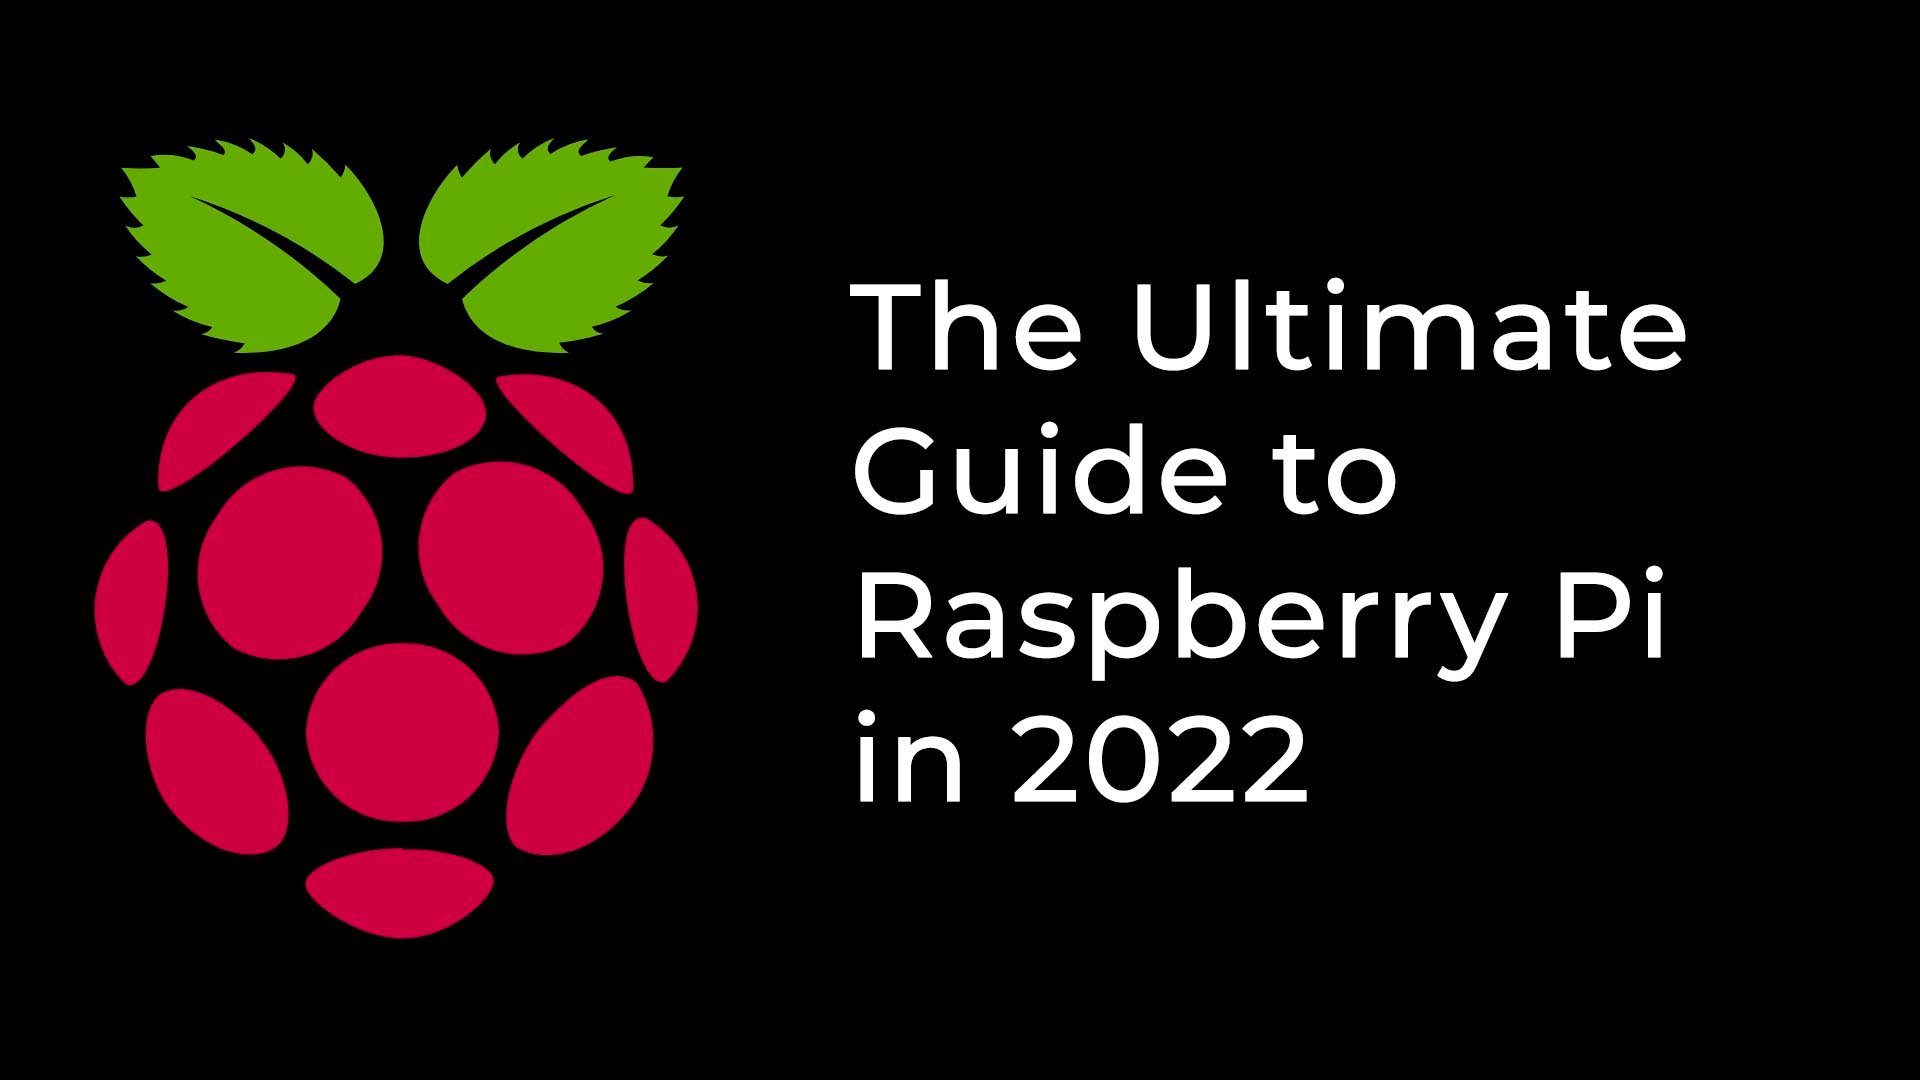 The Ultimate Guide to Raspberry Pi in 2022